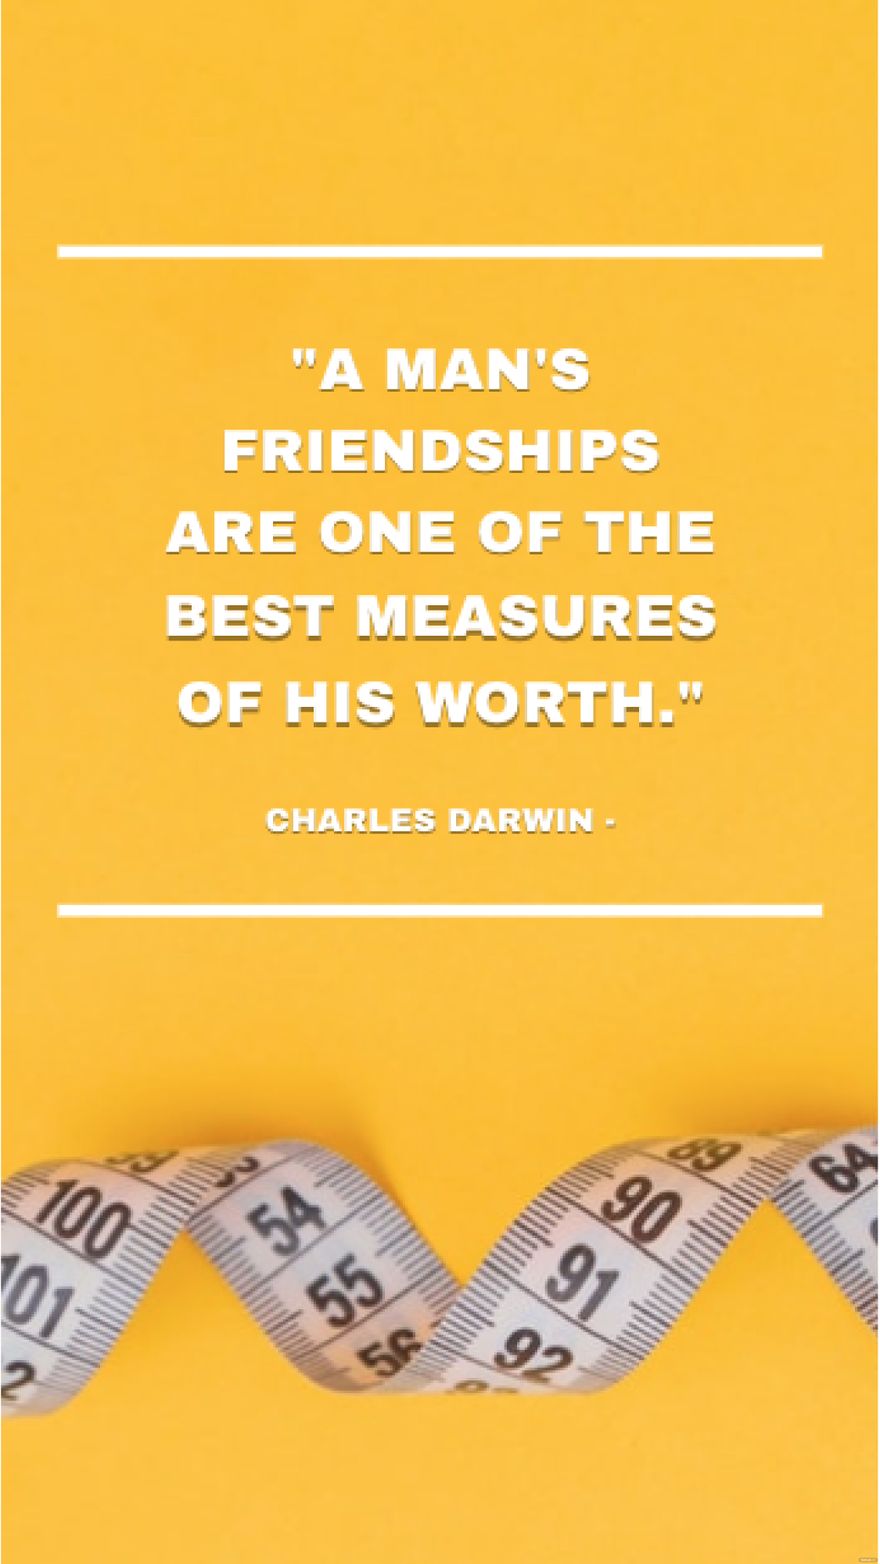 Charles Darwin - A man's friendships are one of the best measures of his worth.